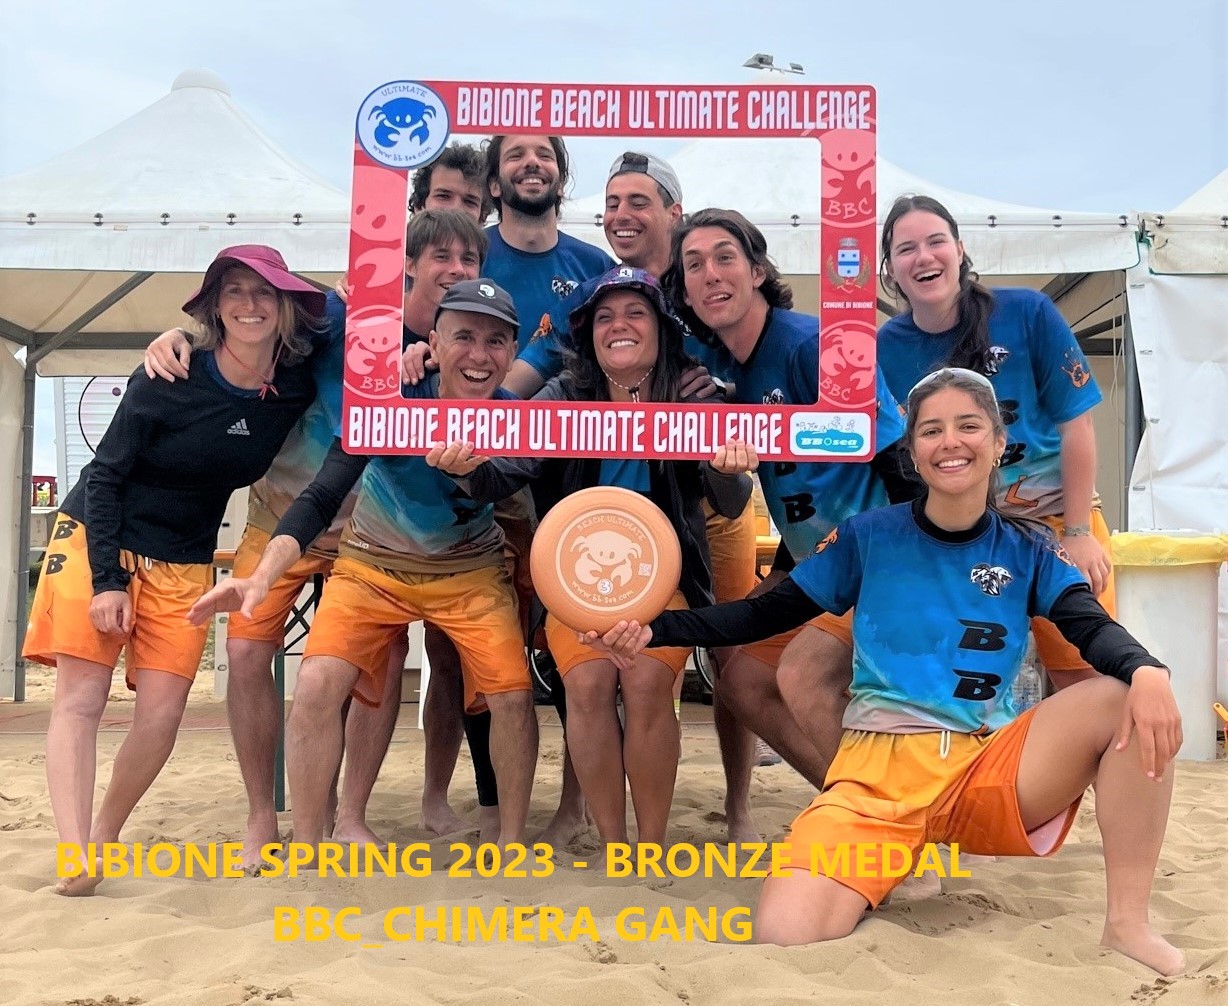 bibione beach ultimate challenge italy